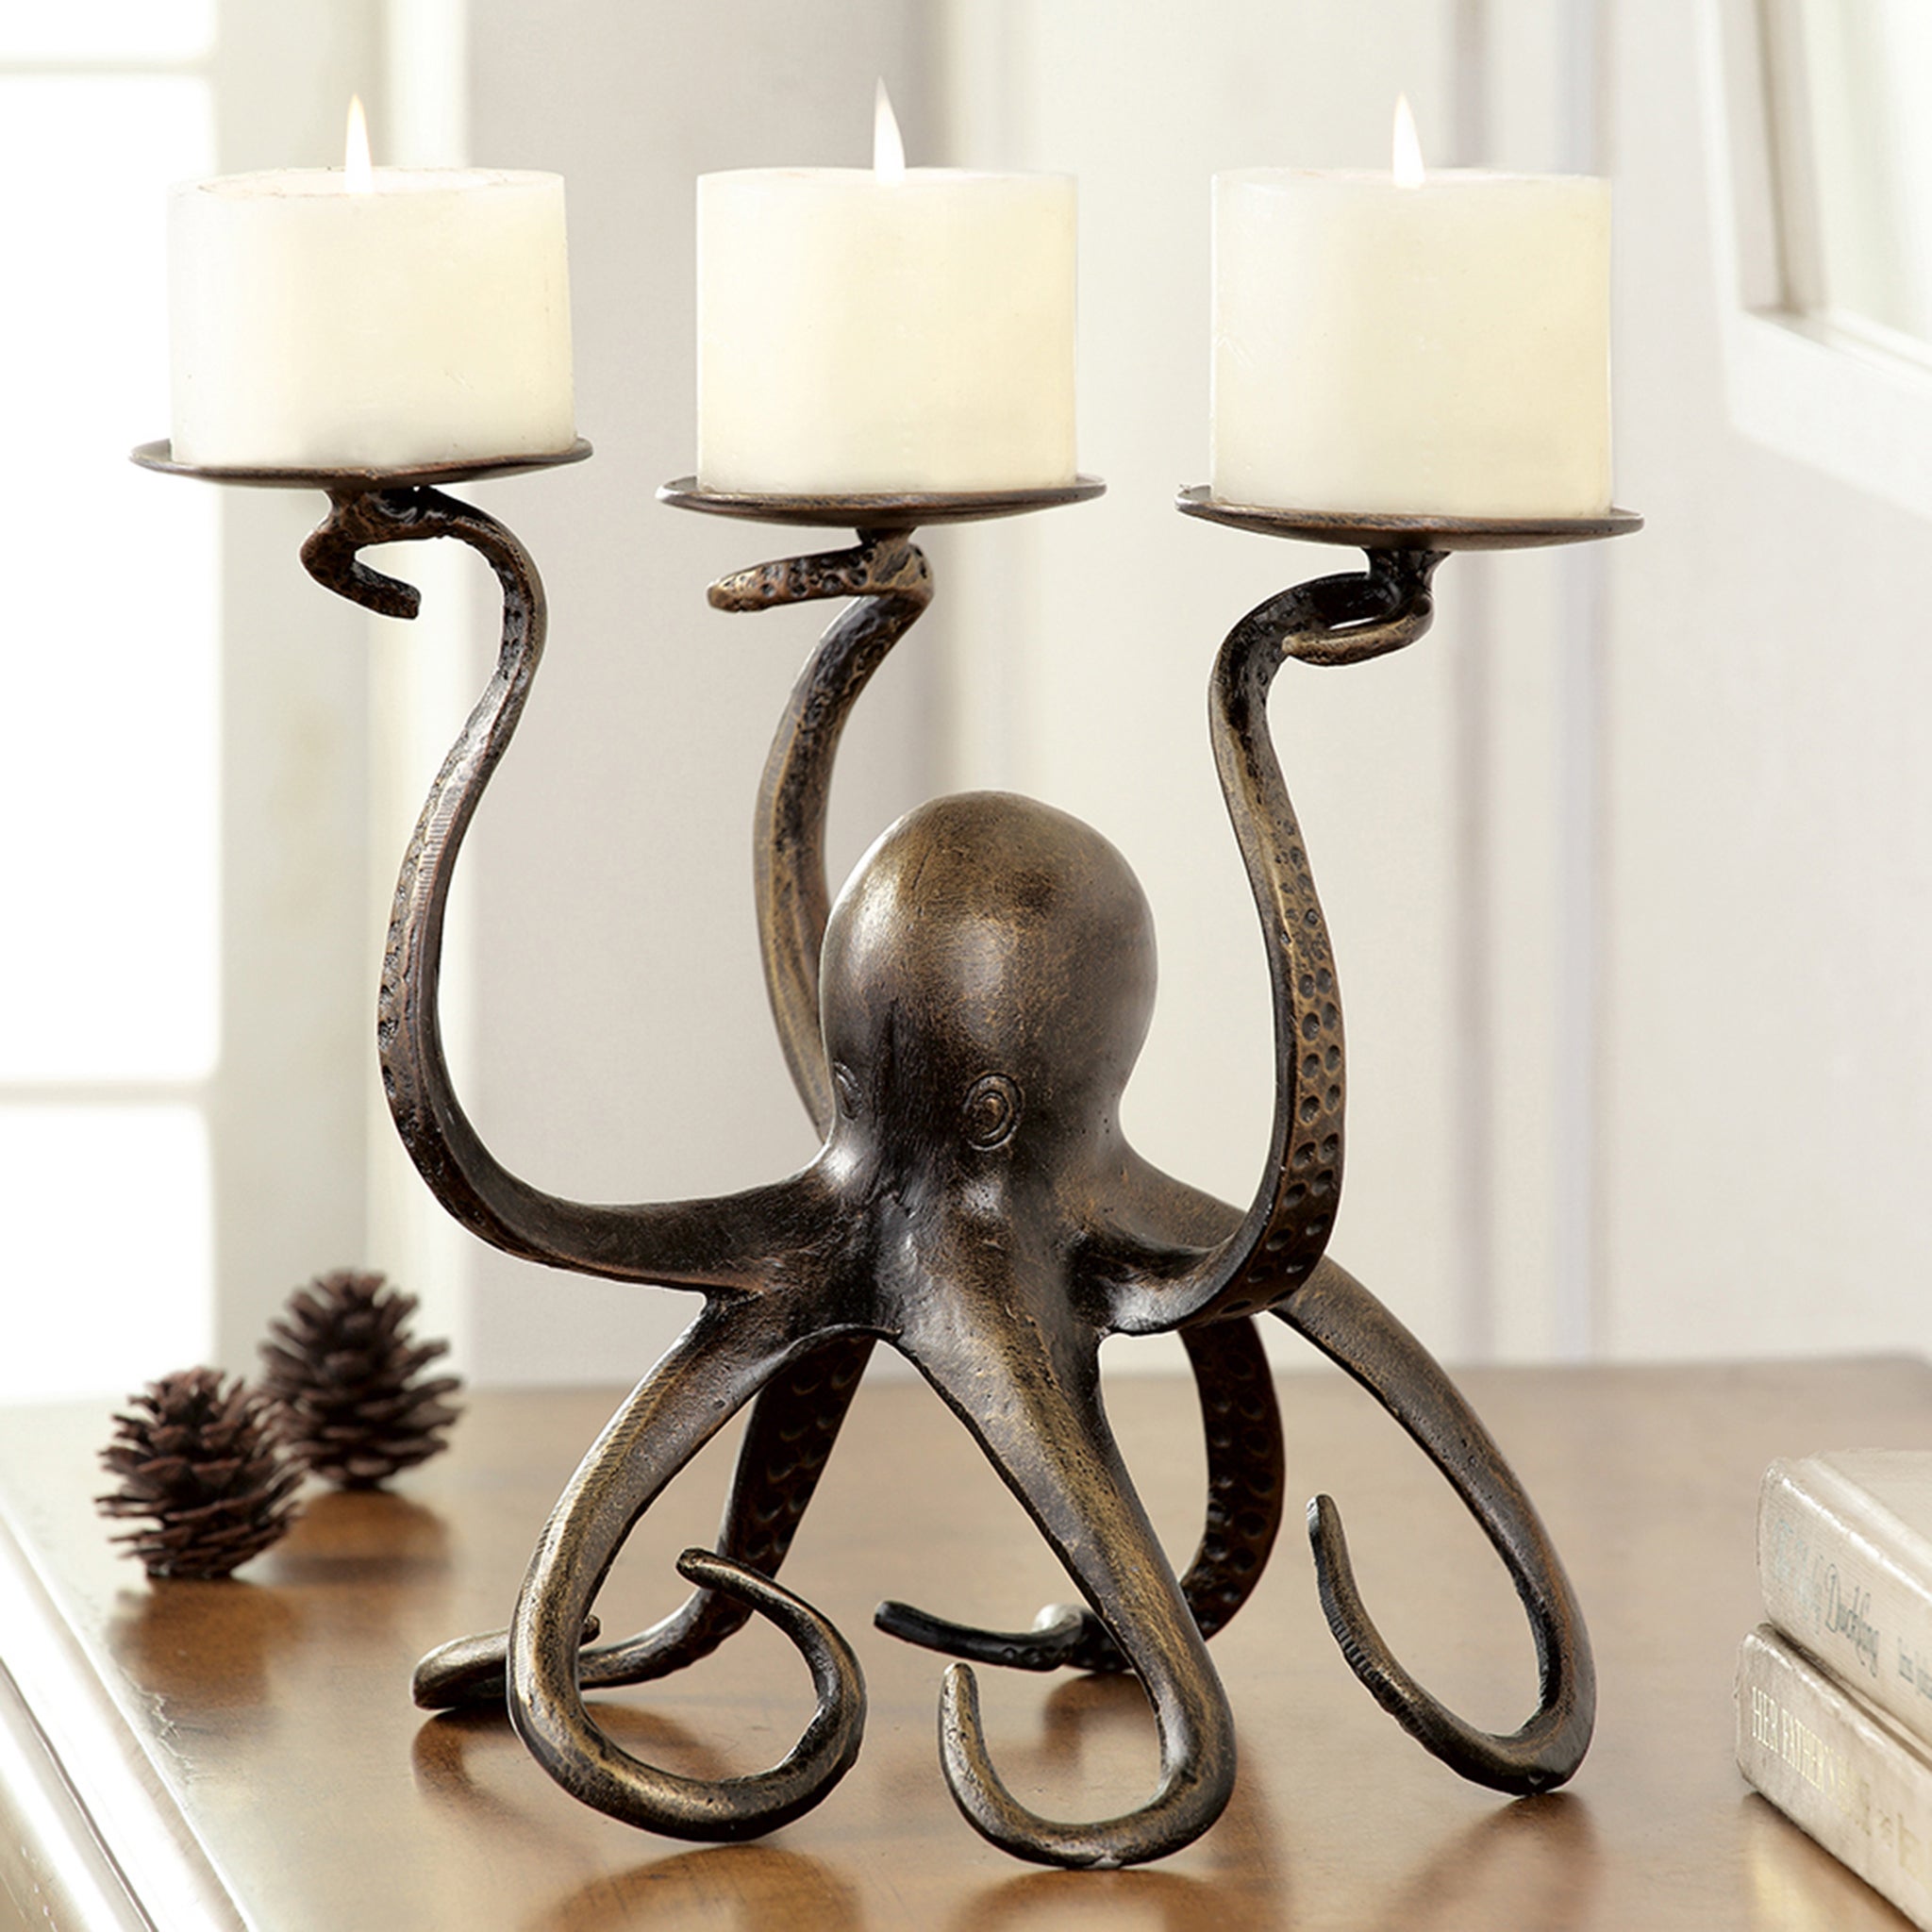 SPI 50979 Ocean Octopus Table Server / Candle Holder Nautical Sea Life 